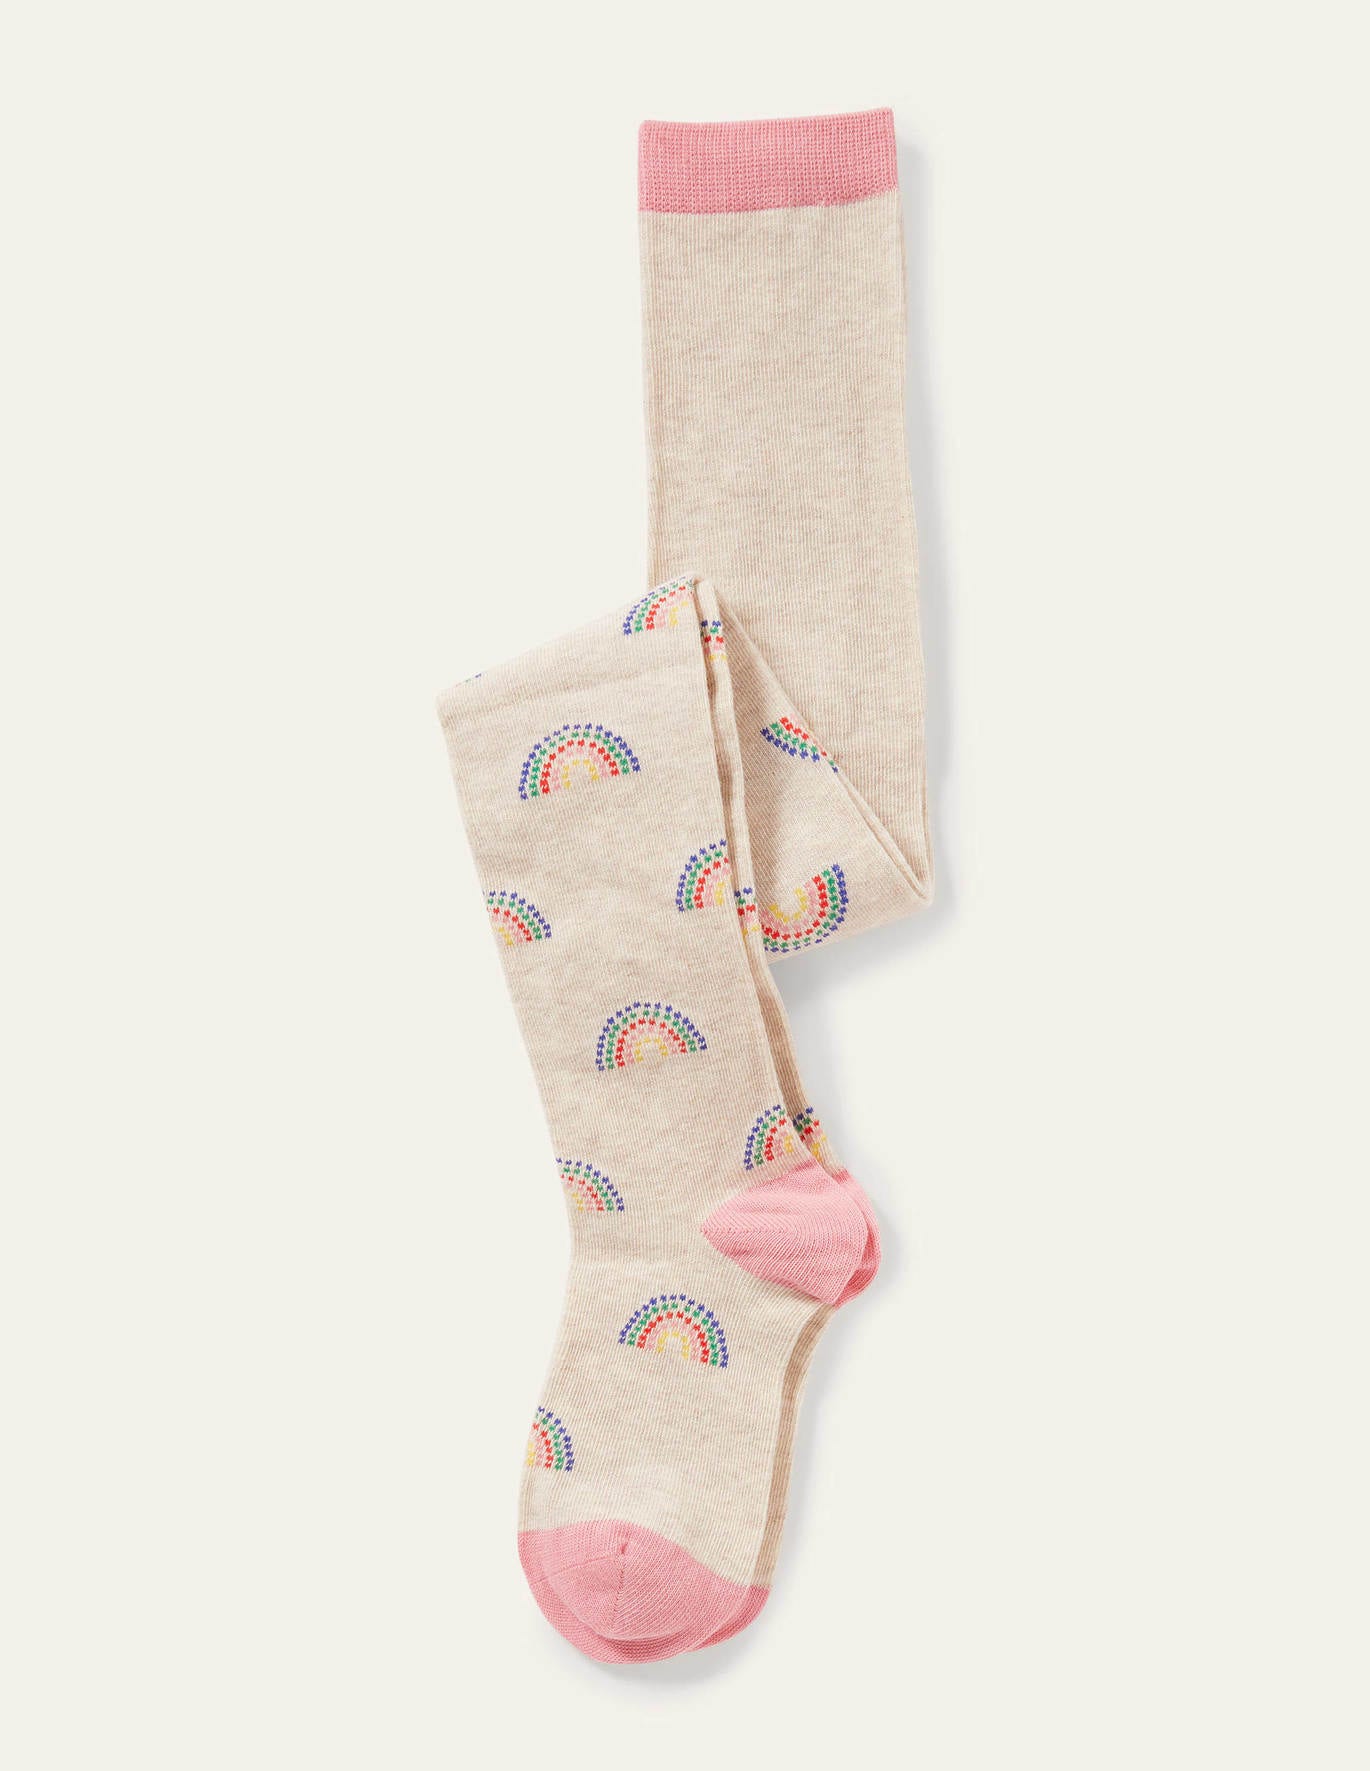 Boden Patterned Tights - Oatmeal Marl Rainbow